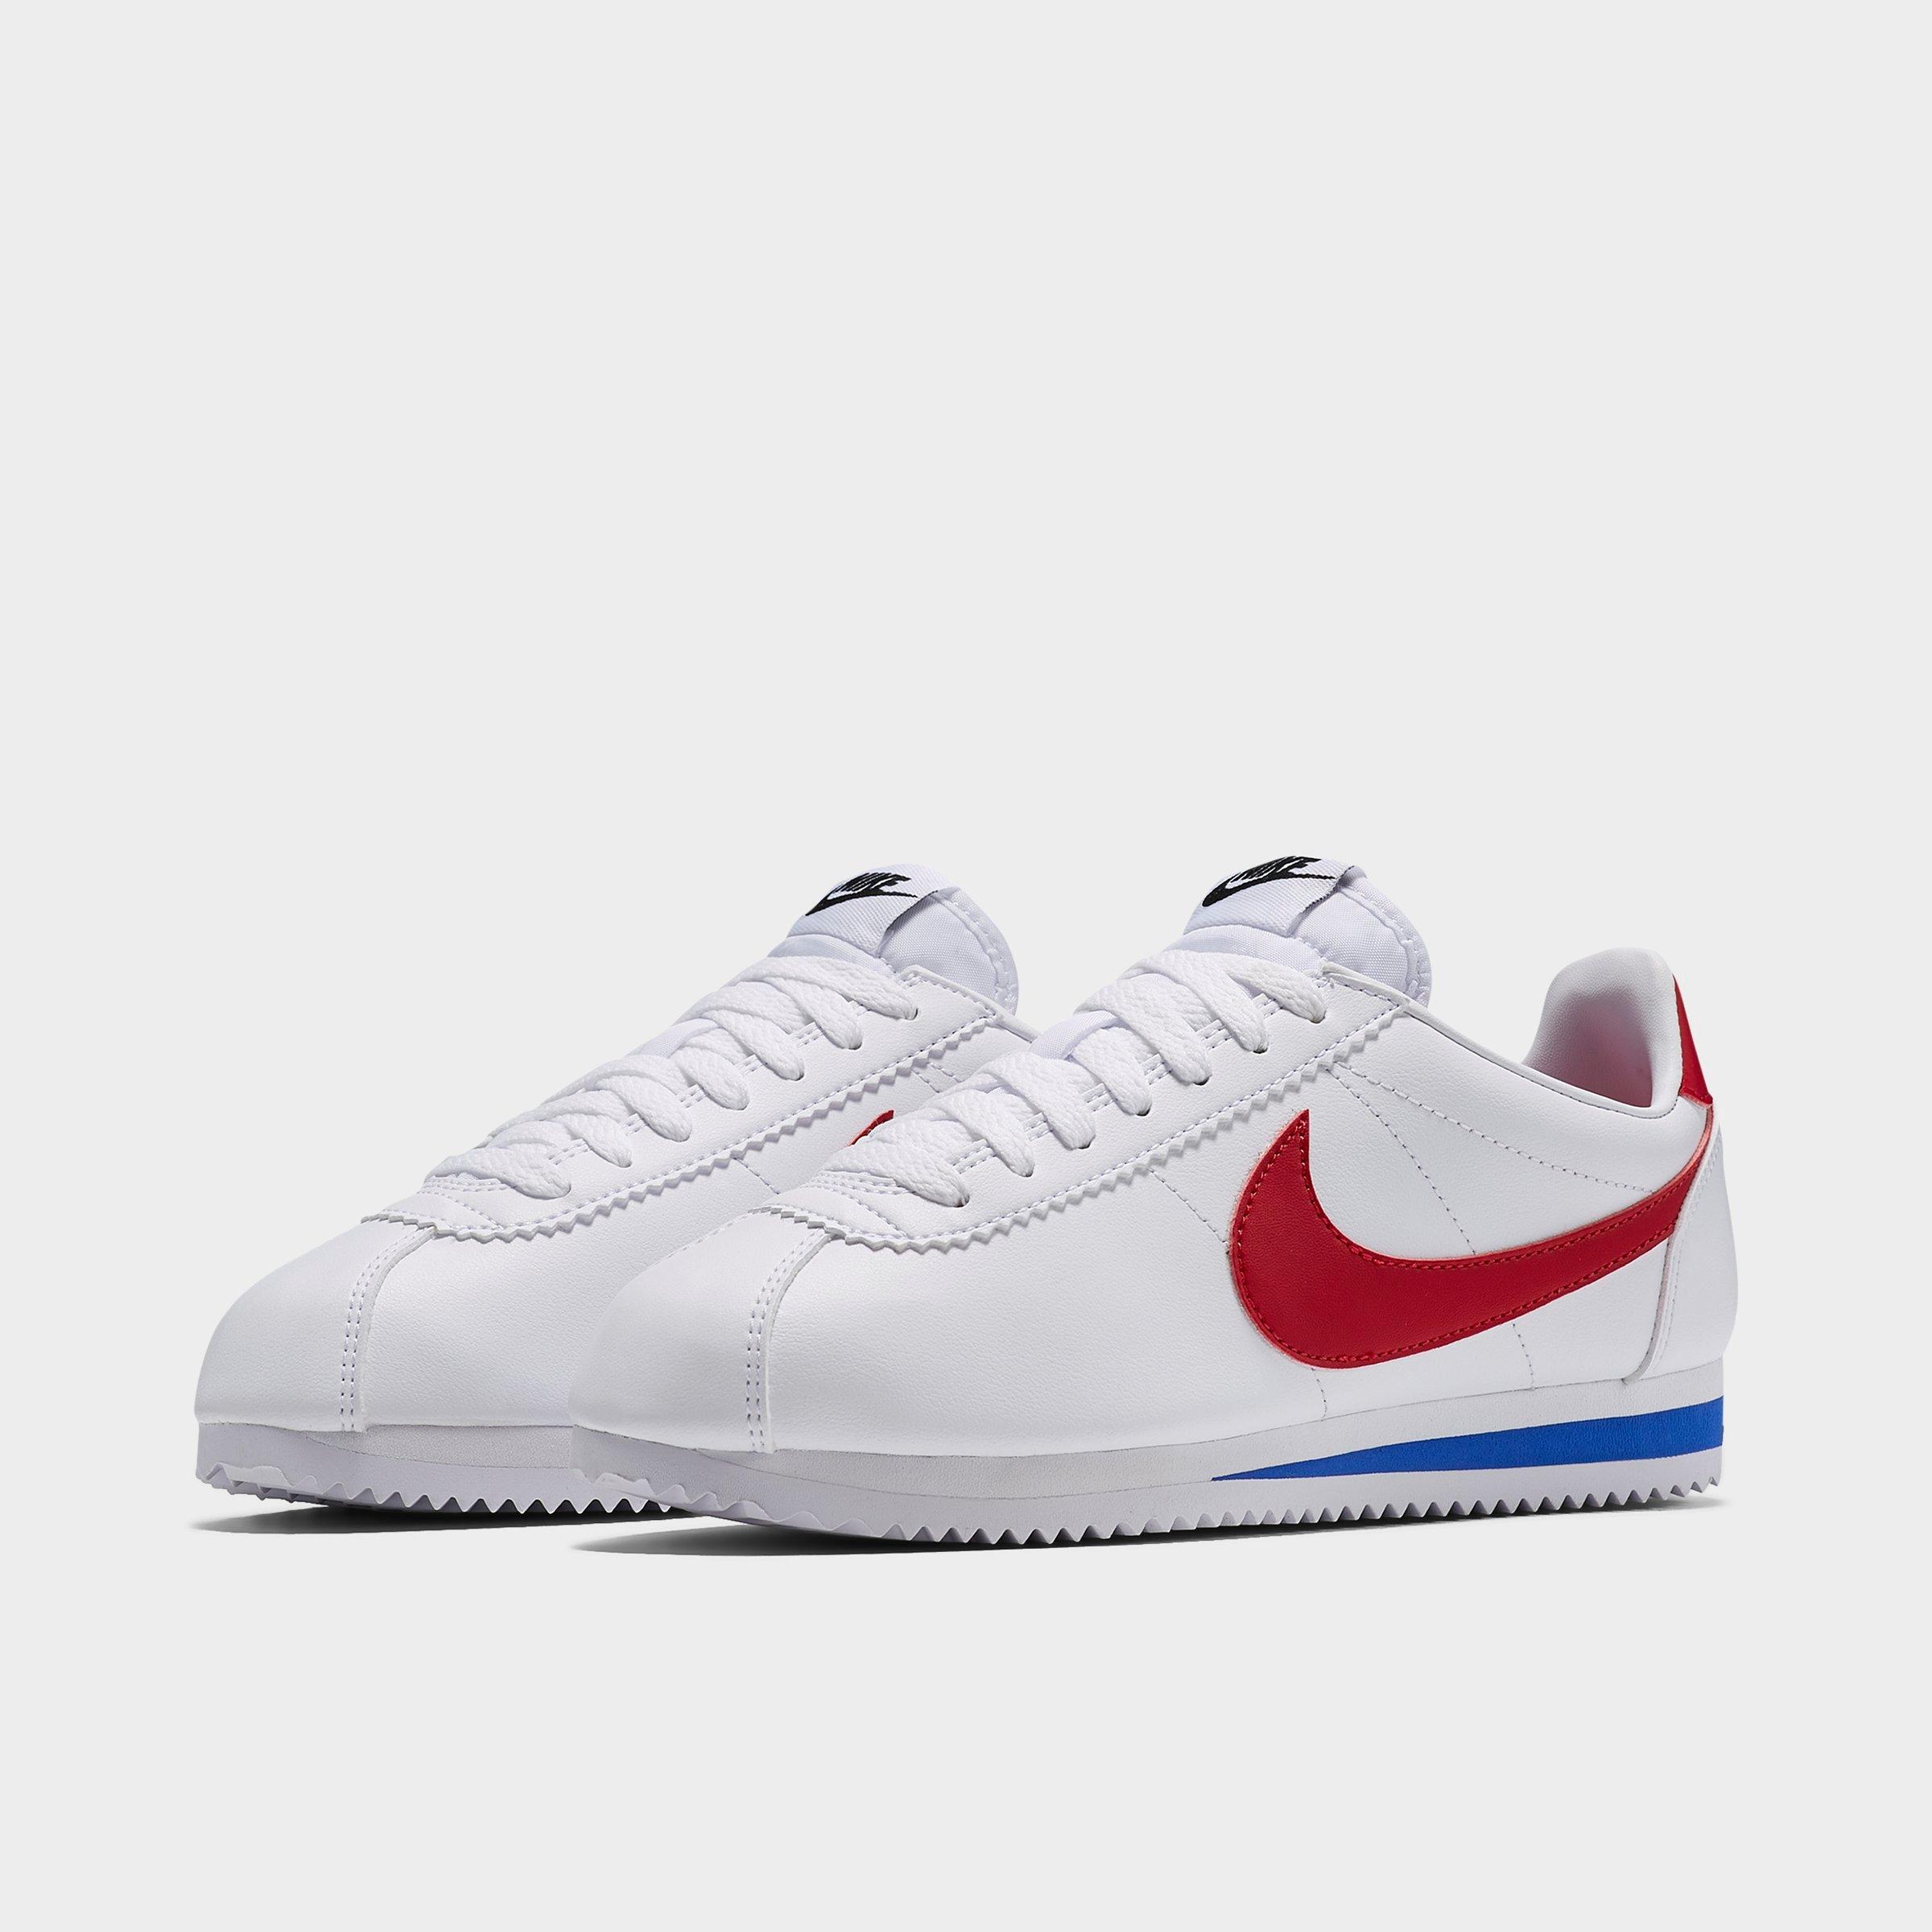 nike classic cortez women's leather sneakers